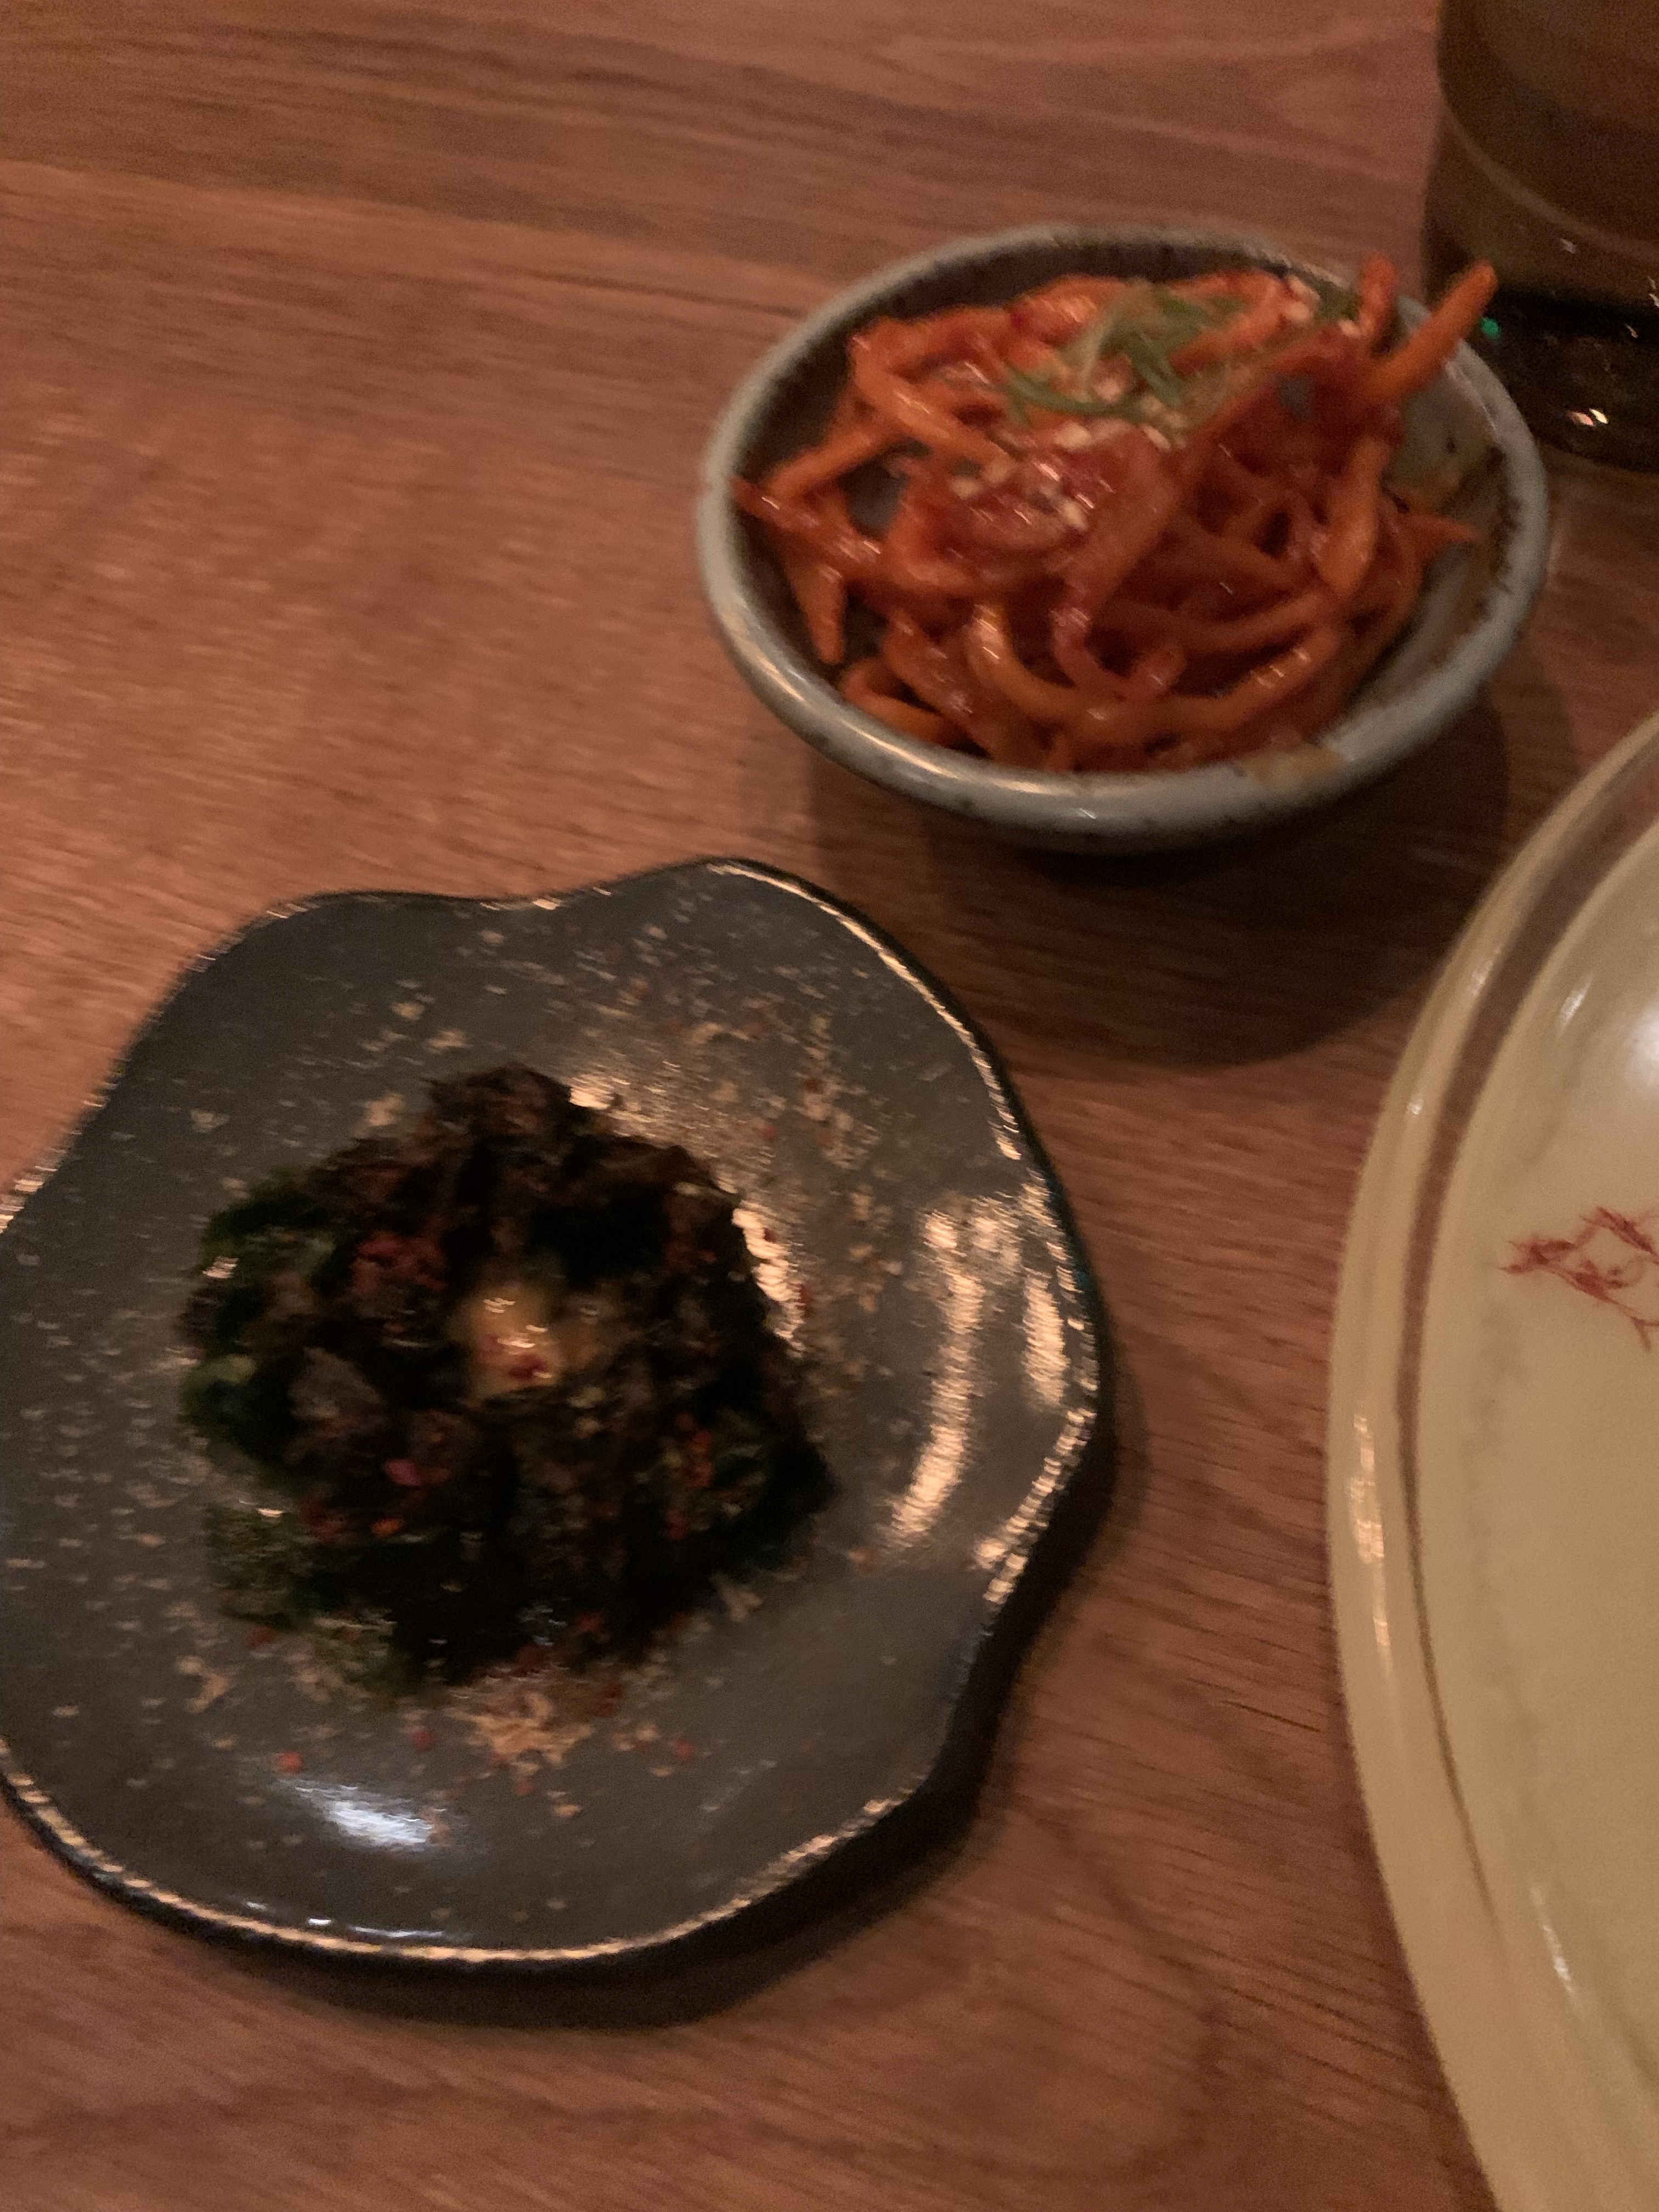 A plate of black sea vegetables, and a plate of bright-red spicy noodle-looking things